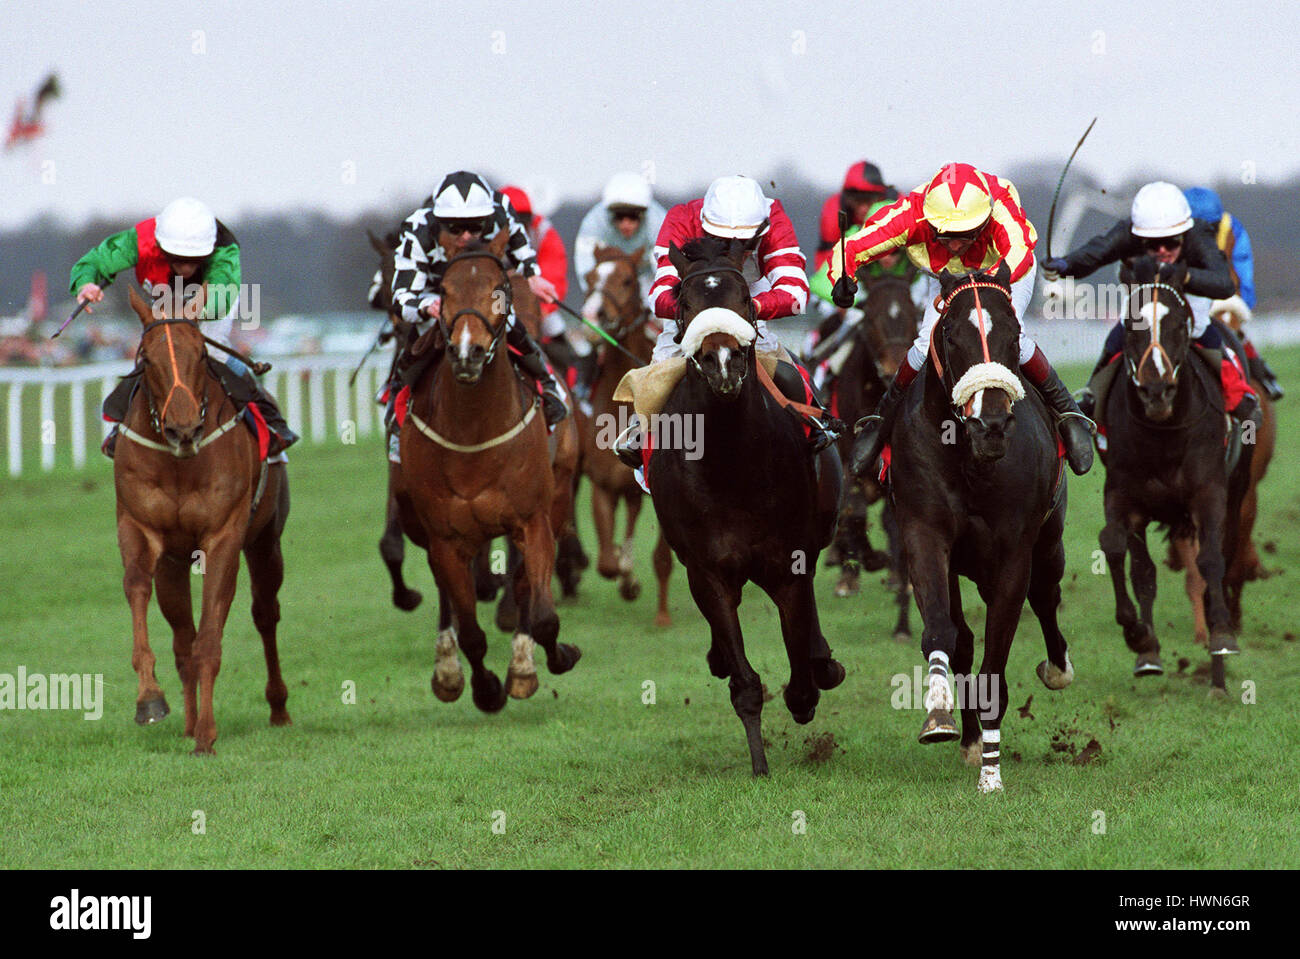 ZUCCHERO LEADS THE FIELD IN THE LINCOLN 2002 DONCASTER RACECOURSE DONCASTER 23 March 2002 Stock Photo